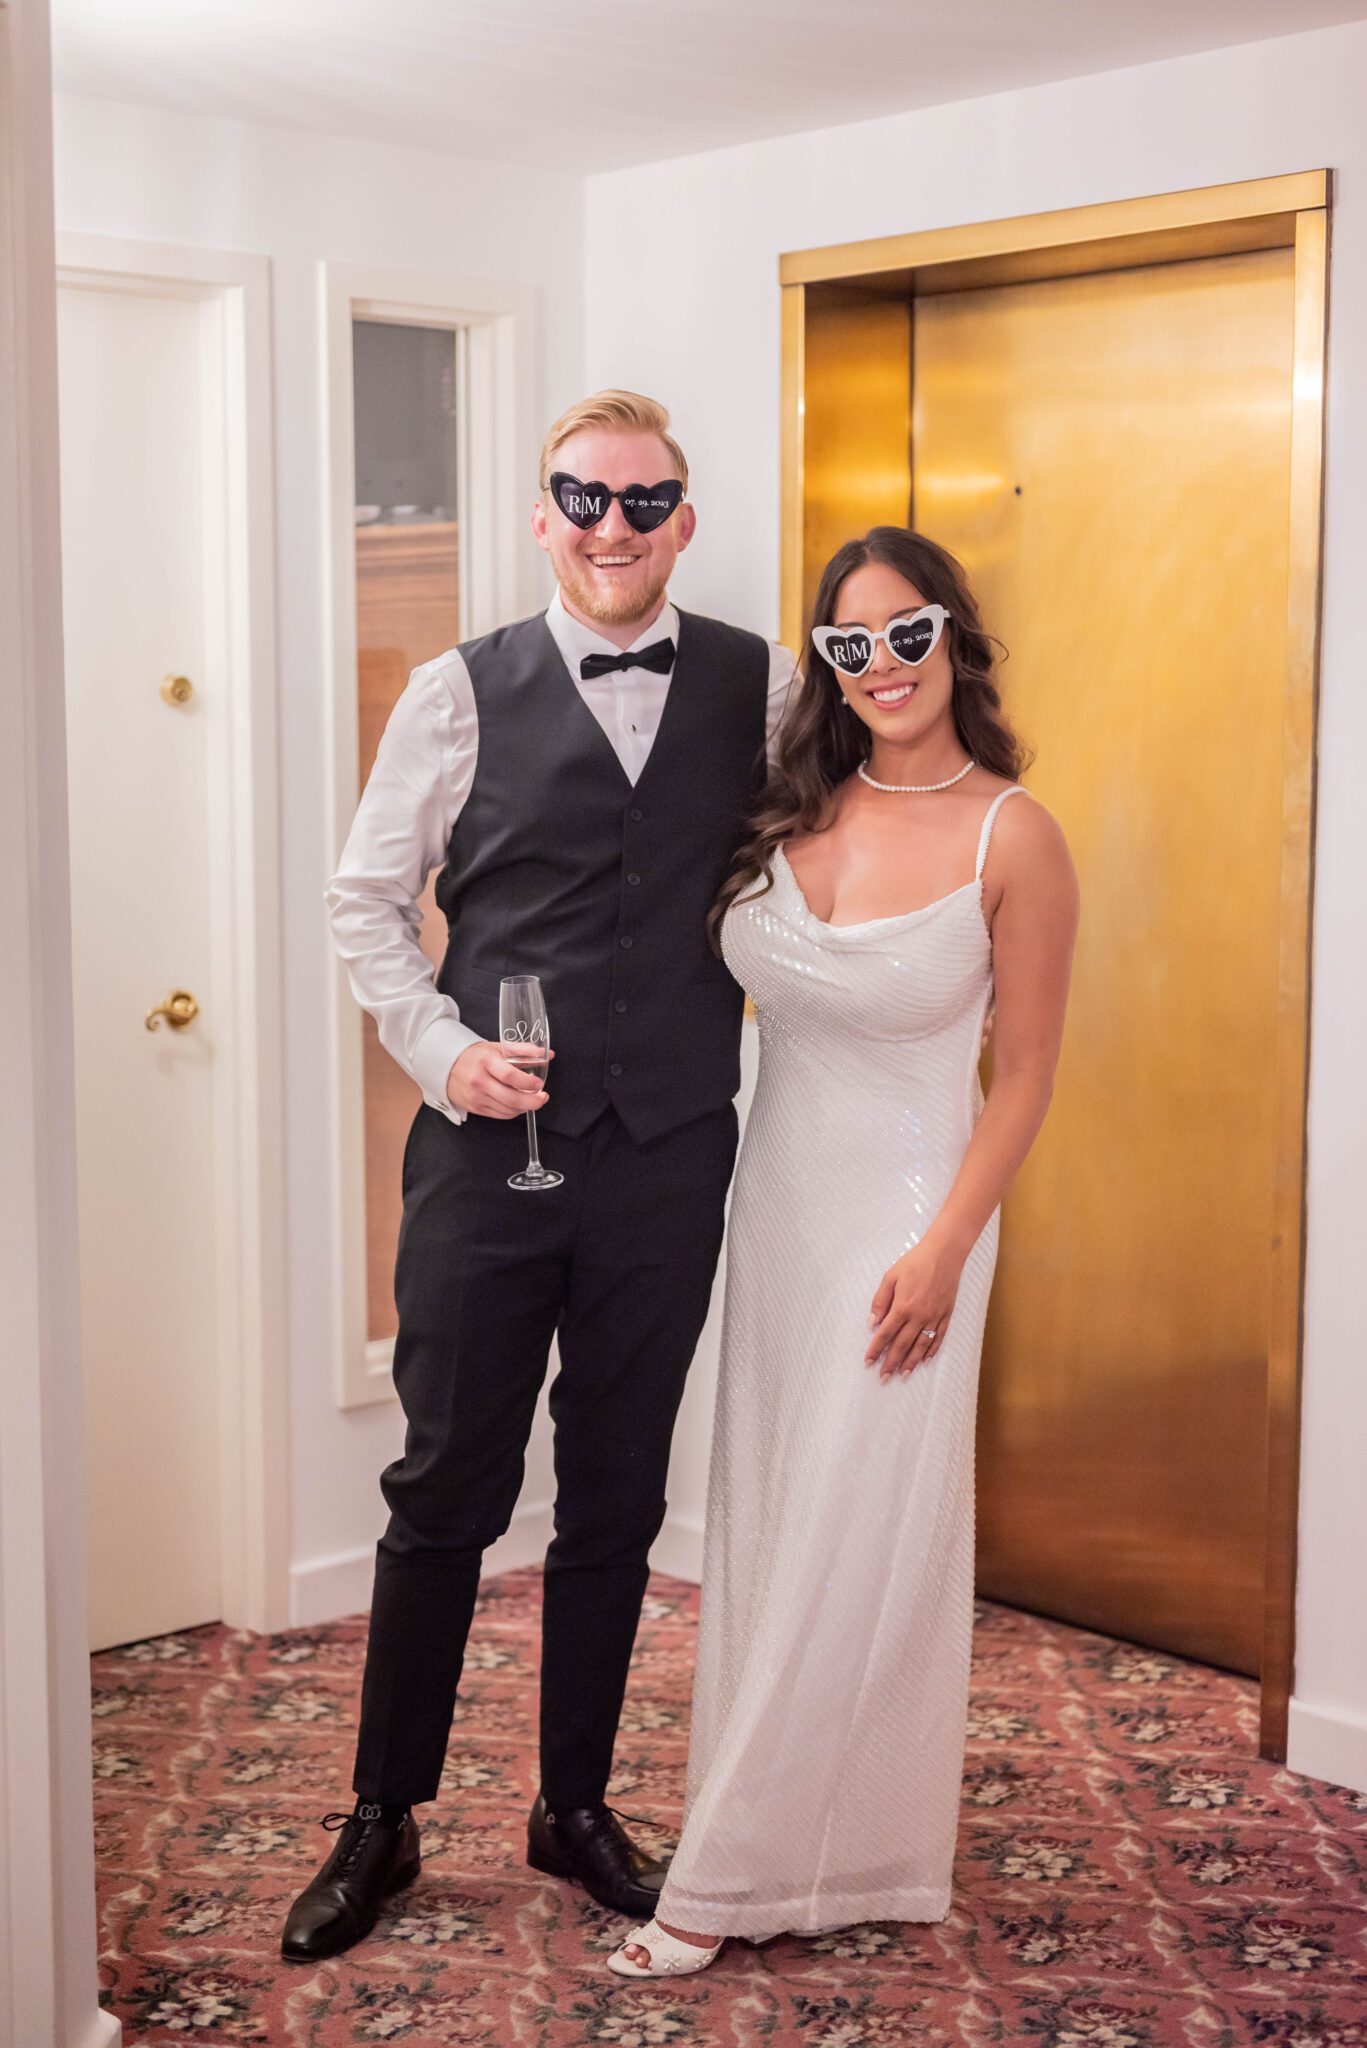 Portrait of bride and groom wearing their second outfits for their reception, featuring bride in sequin gown and heart-shaped sunglasses.